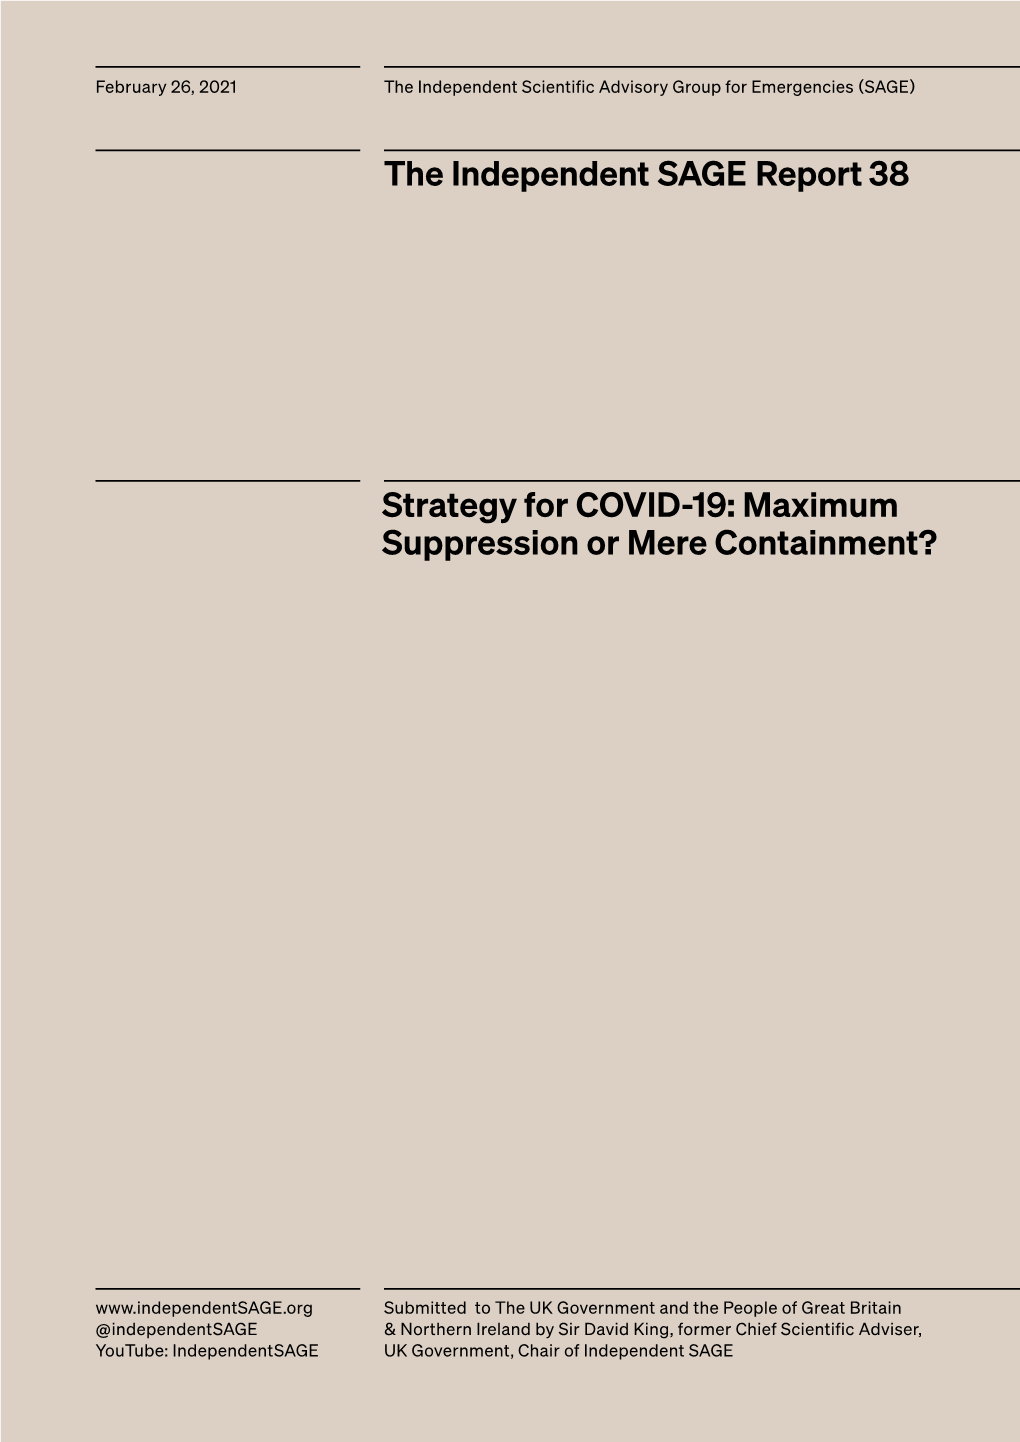 Strategy for COVID-19: Maximum Suppression Or Mere Containment? the Independent SAGE Report 38